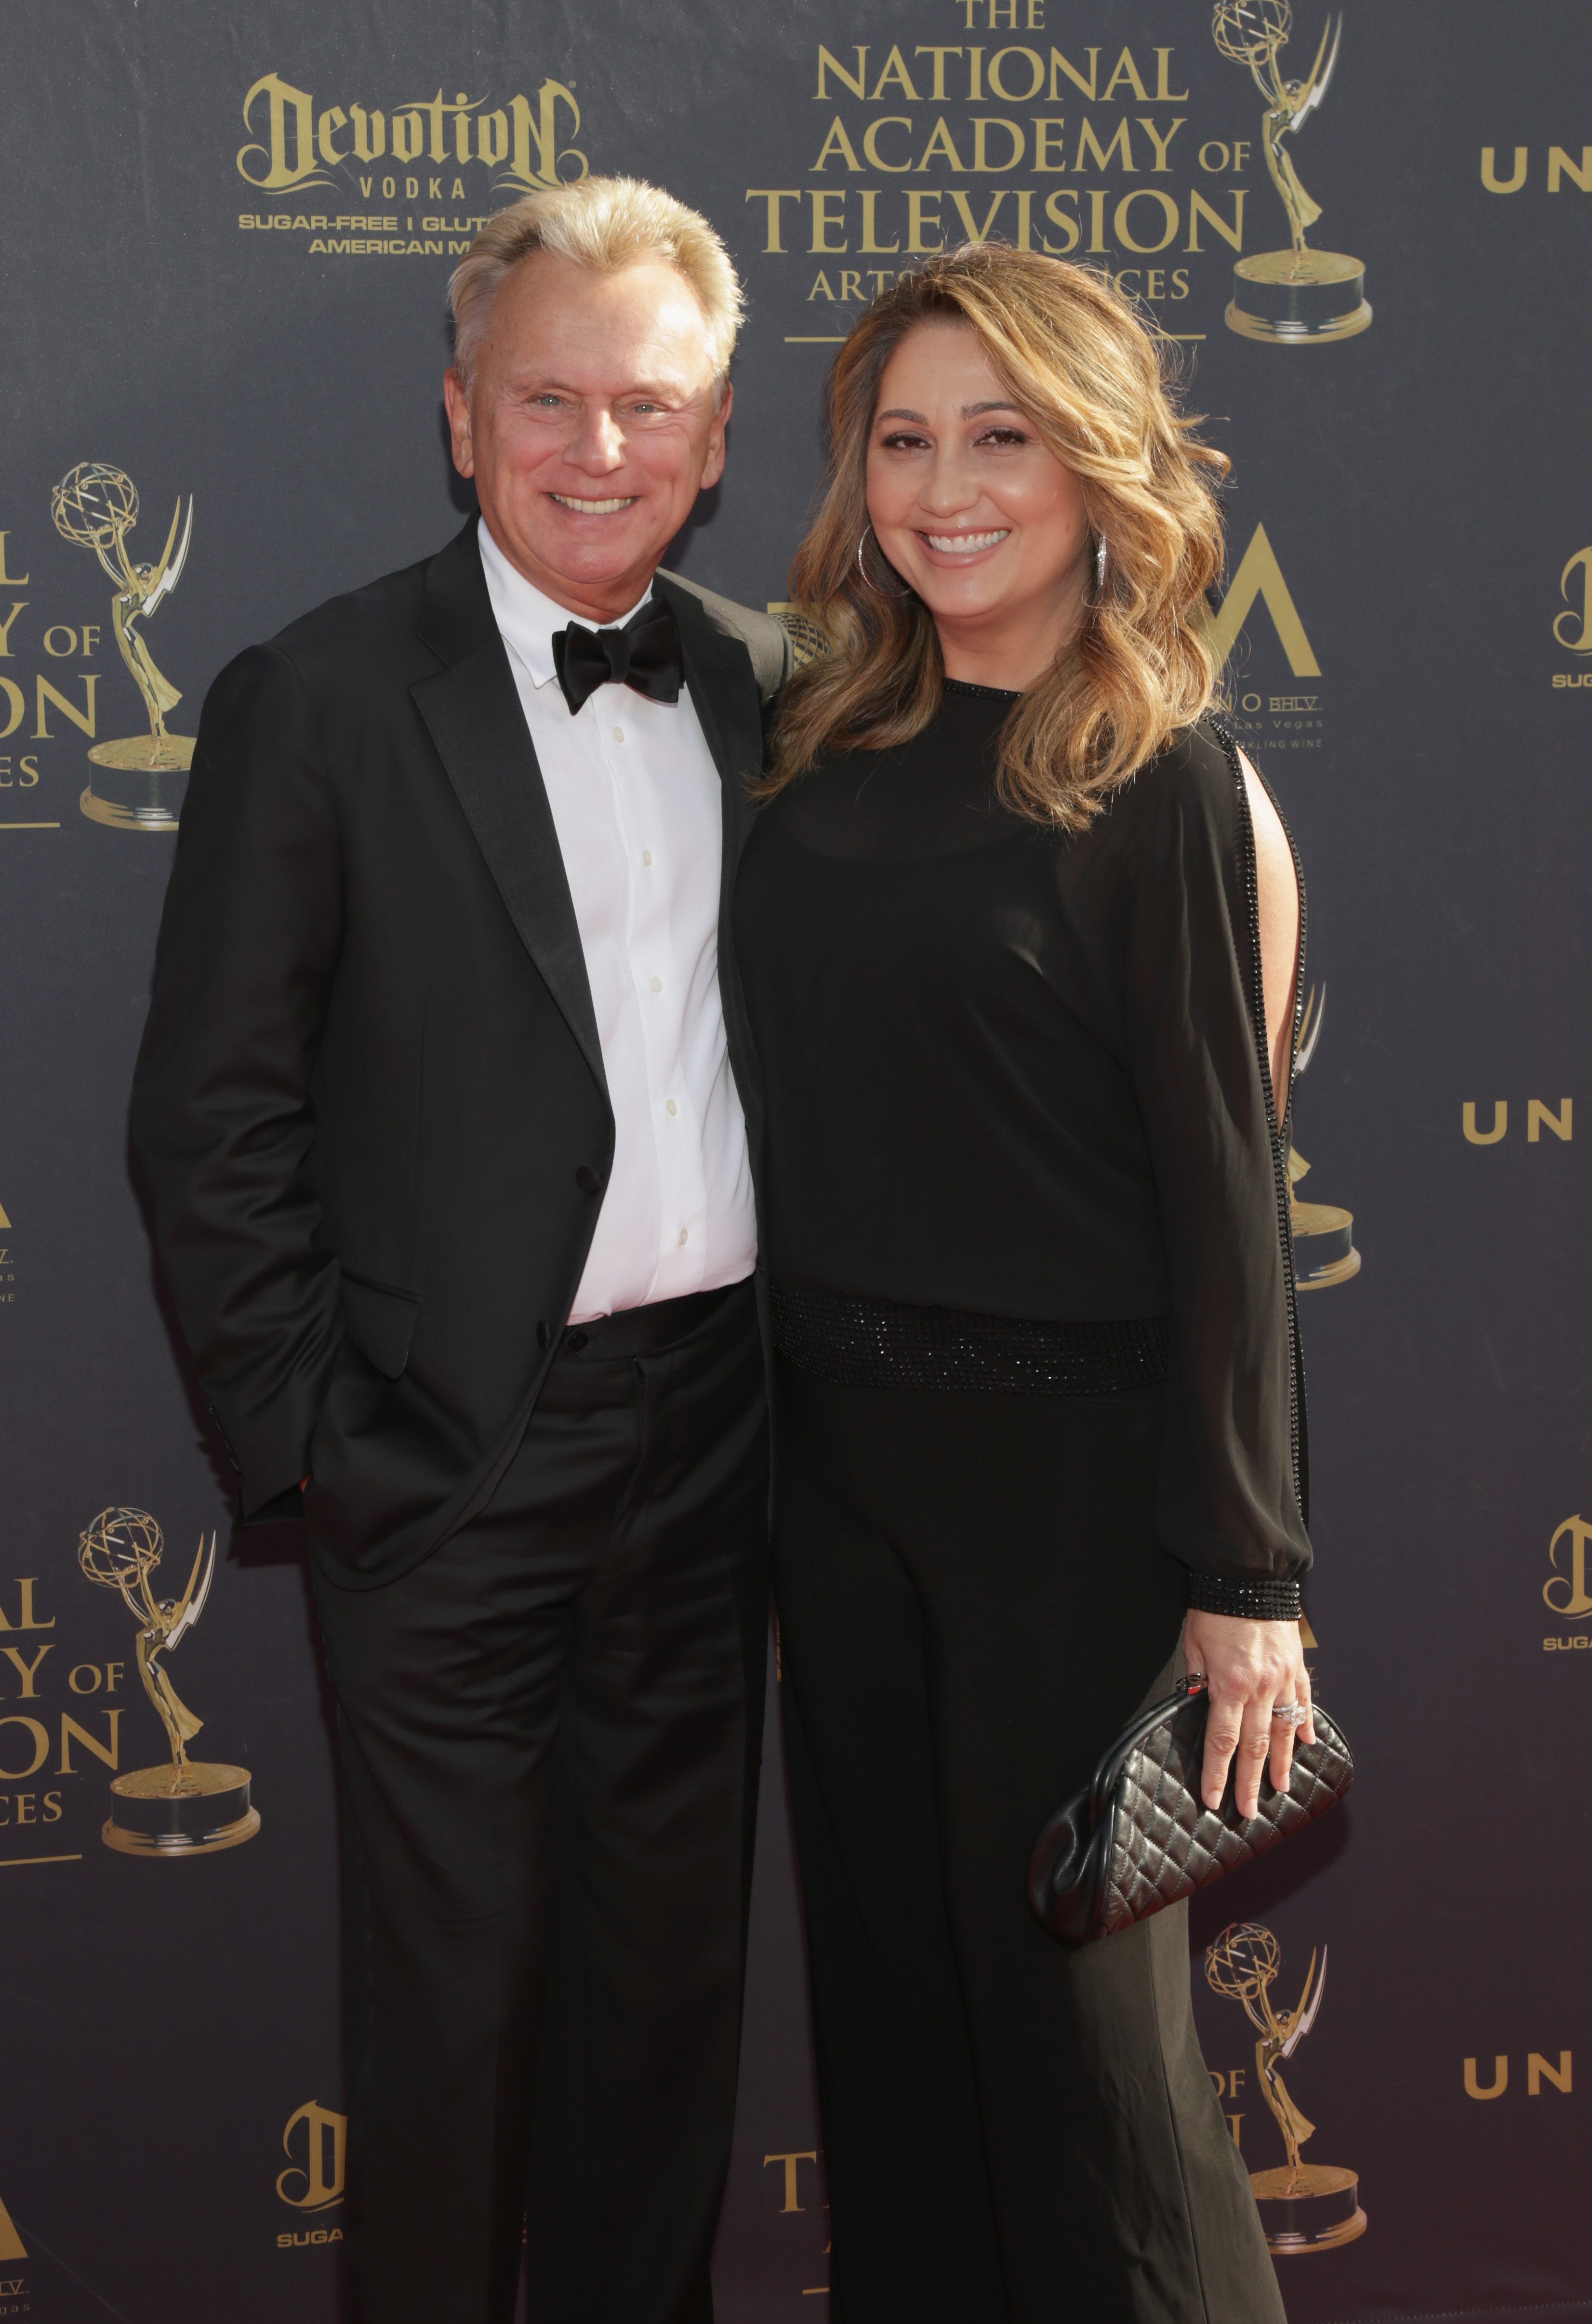 Pat Sajak and Lesly Brown attend the 44th Annual Daytime Creative Arts Emmy Awards - Arrivals at Pasadena Civic Auditorium on April 28, 2017, in Pasadena, California. | Source: Getty Images